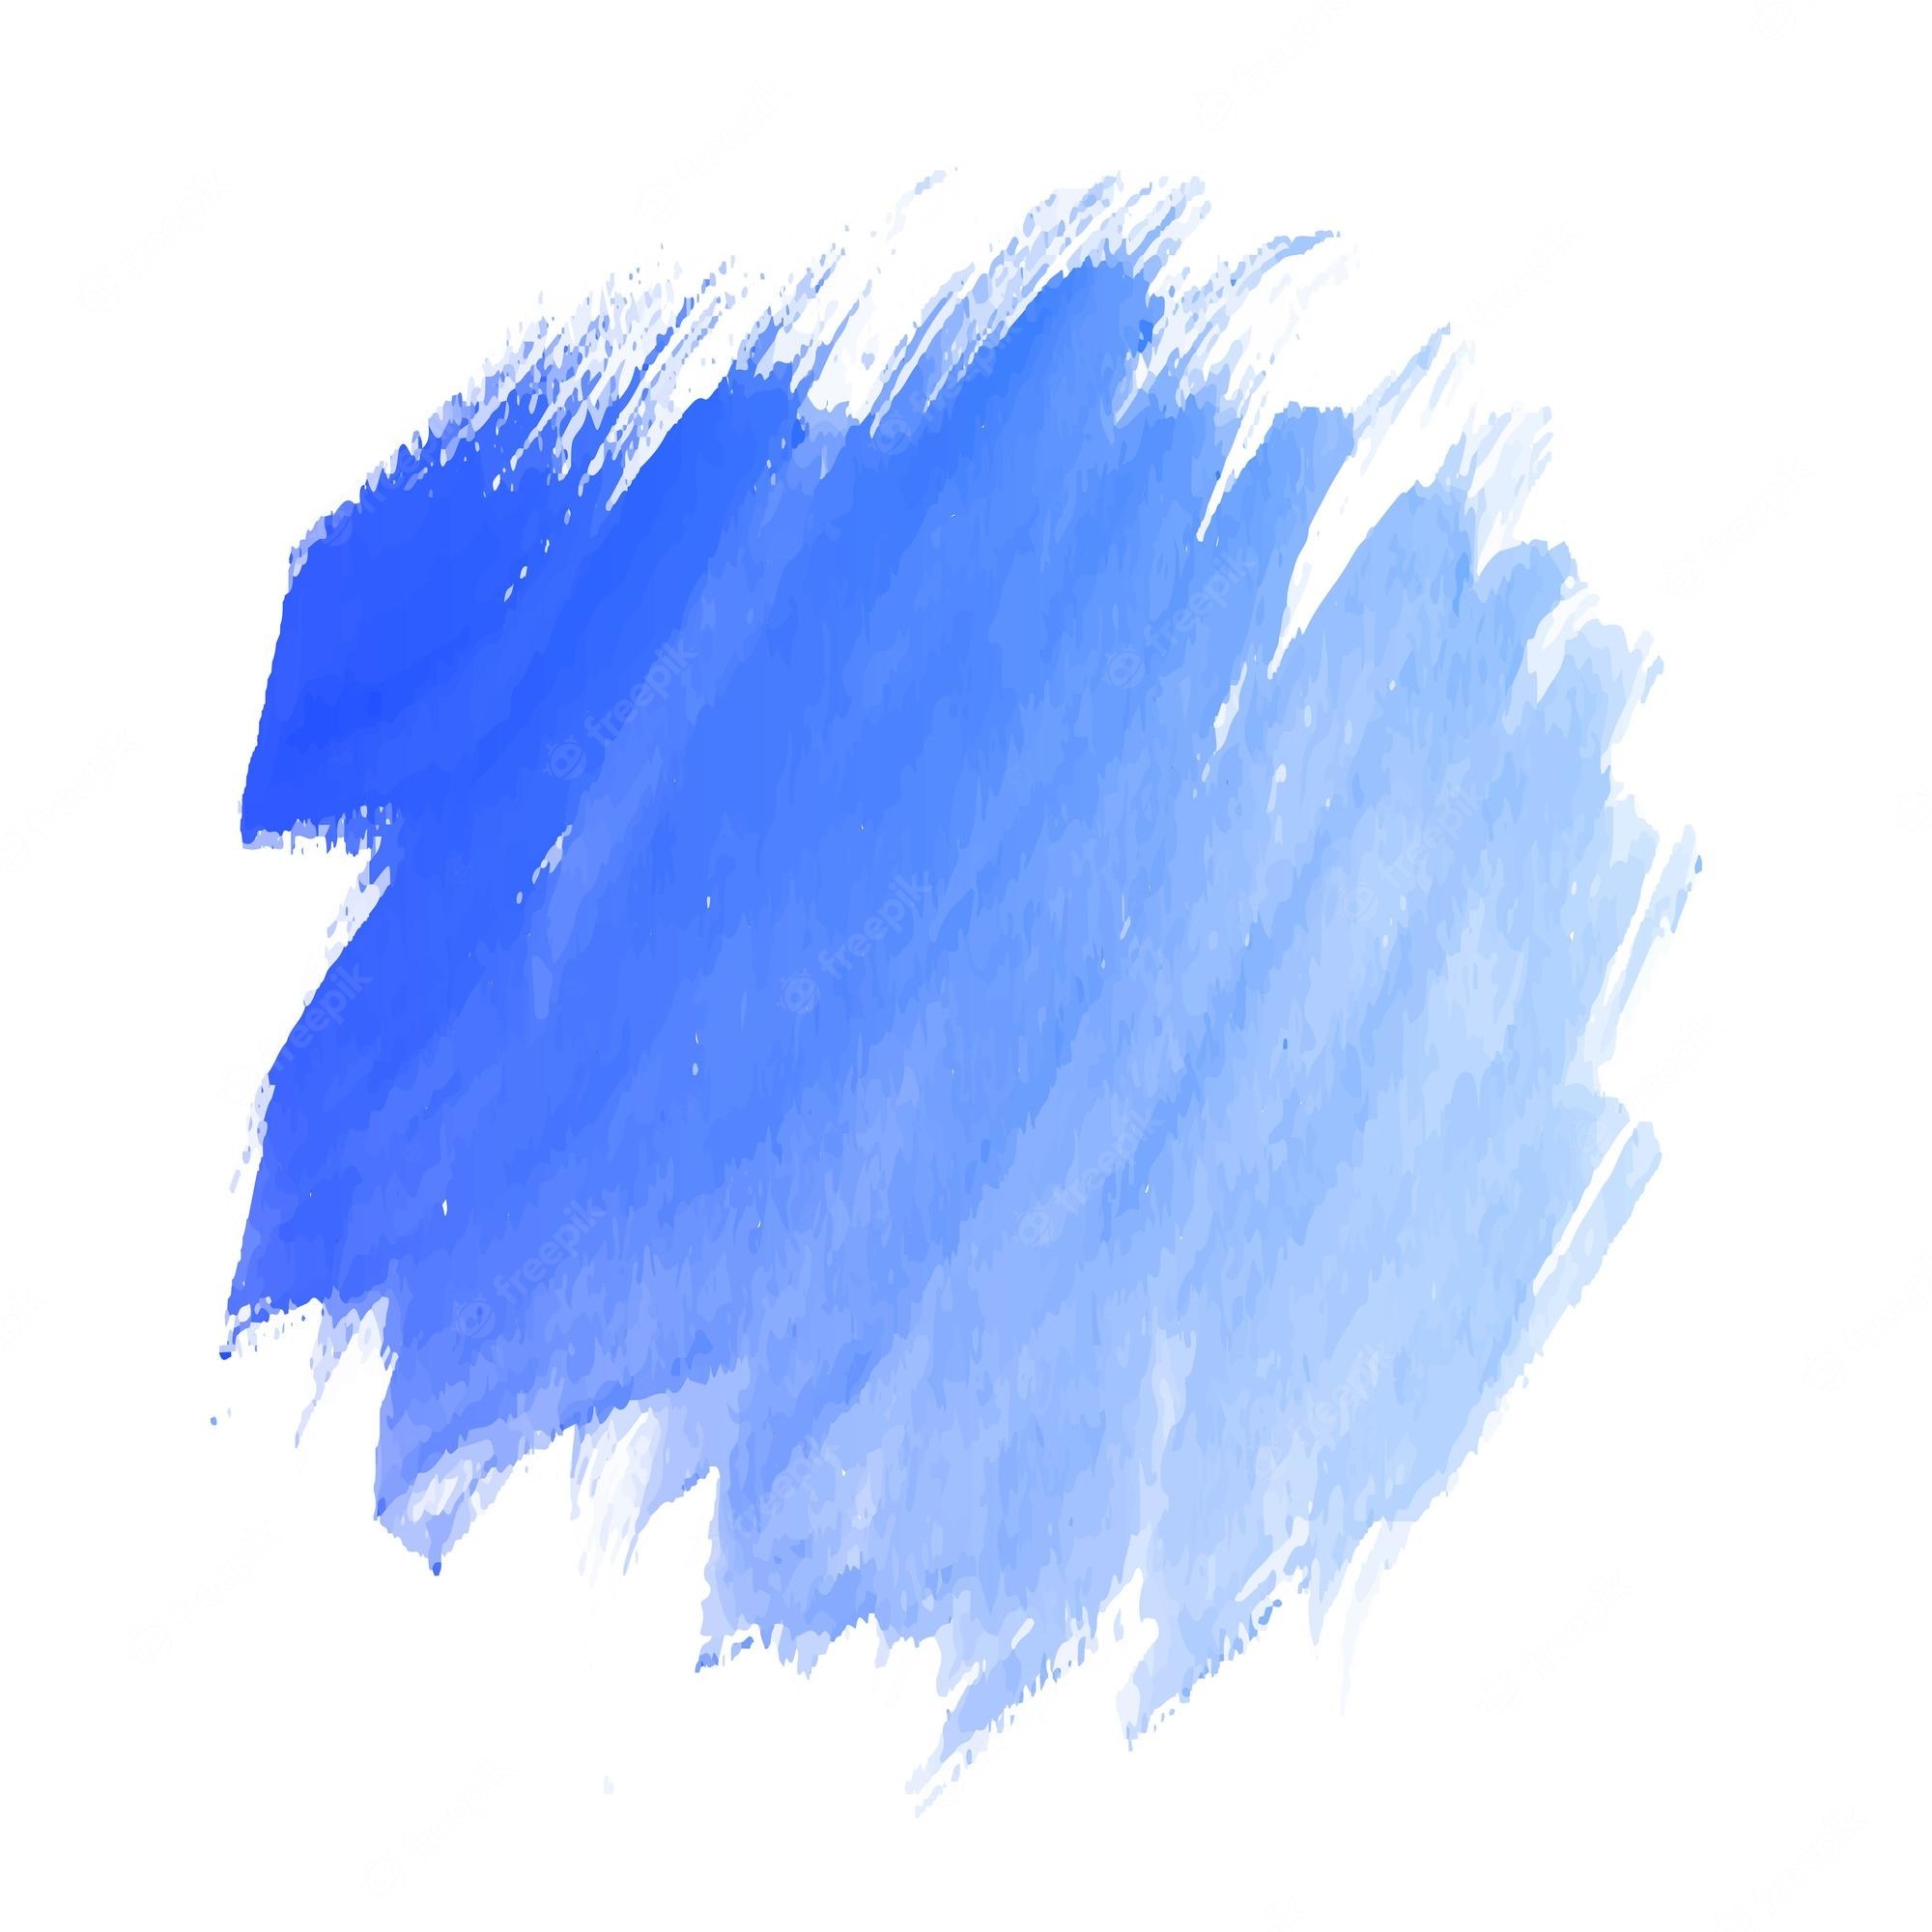 Picture of: Blue Brush Stroke Images – Free Download on Freepik